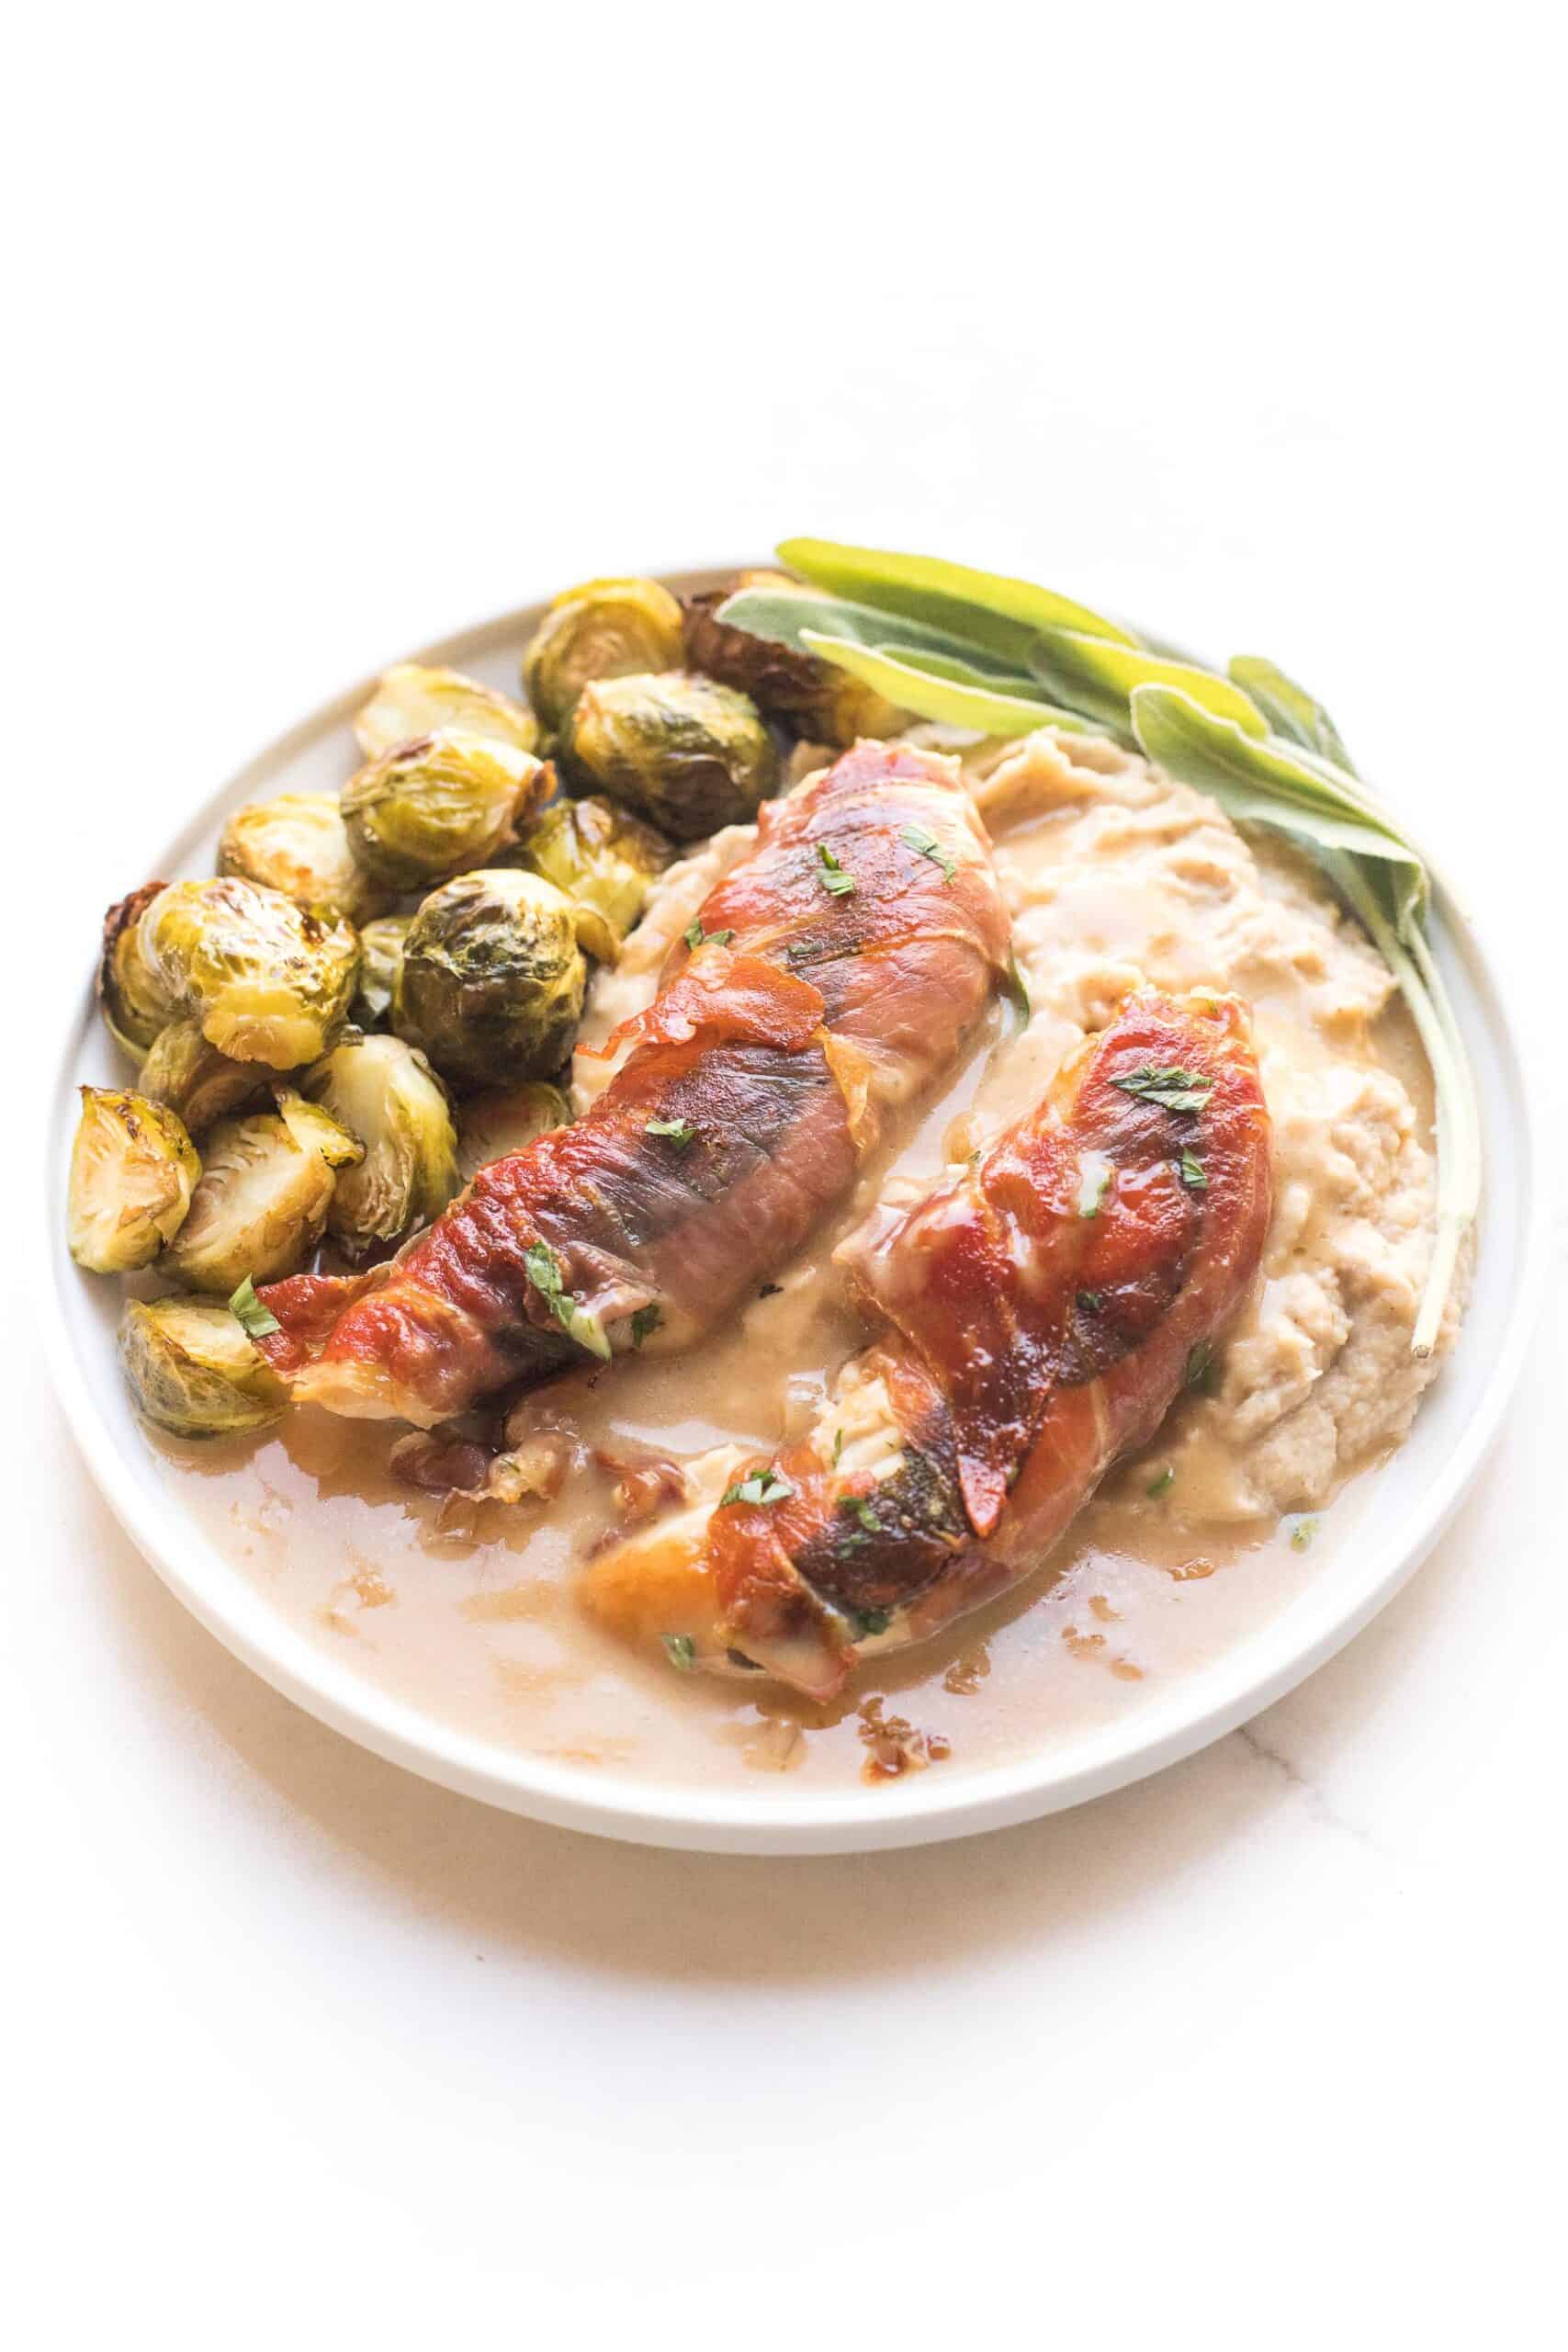 keto + whole30 prosciutto wrapped chicken with creamy apple cider gravy over mashed cauliflower with roasted brussels sprouts on a white plate and background